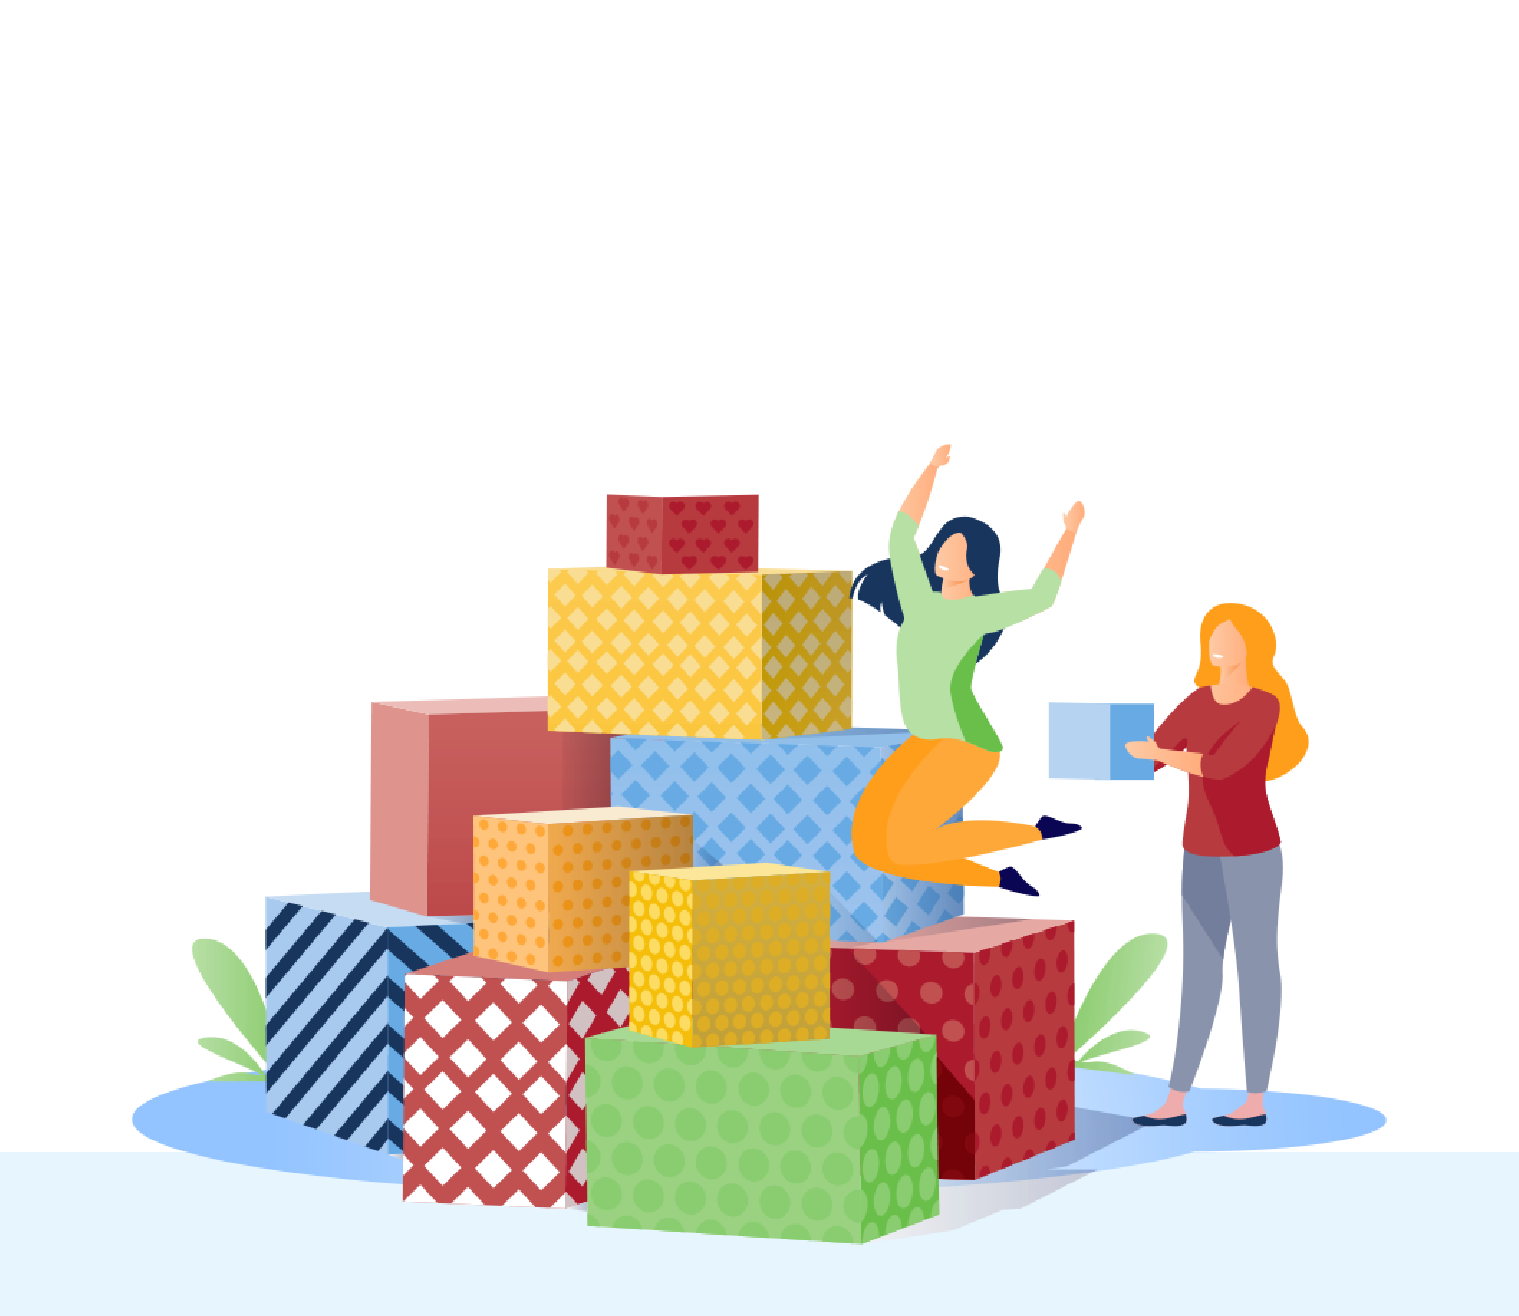 tower of boxes with various colors and patterns and two people with excited expressions in front of it